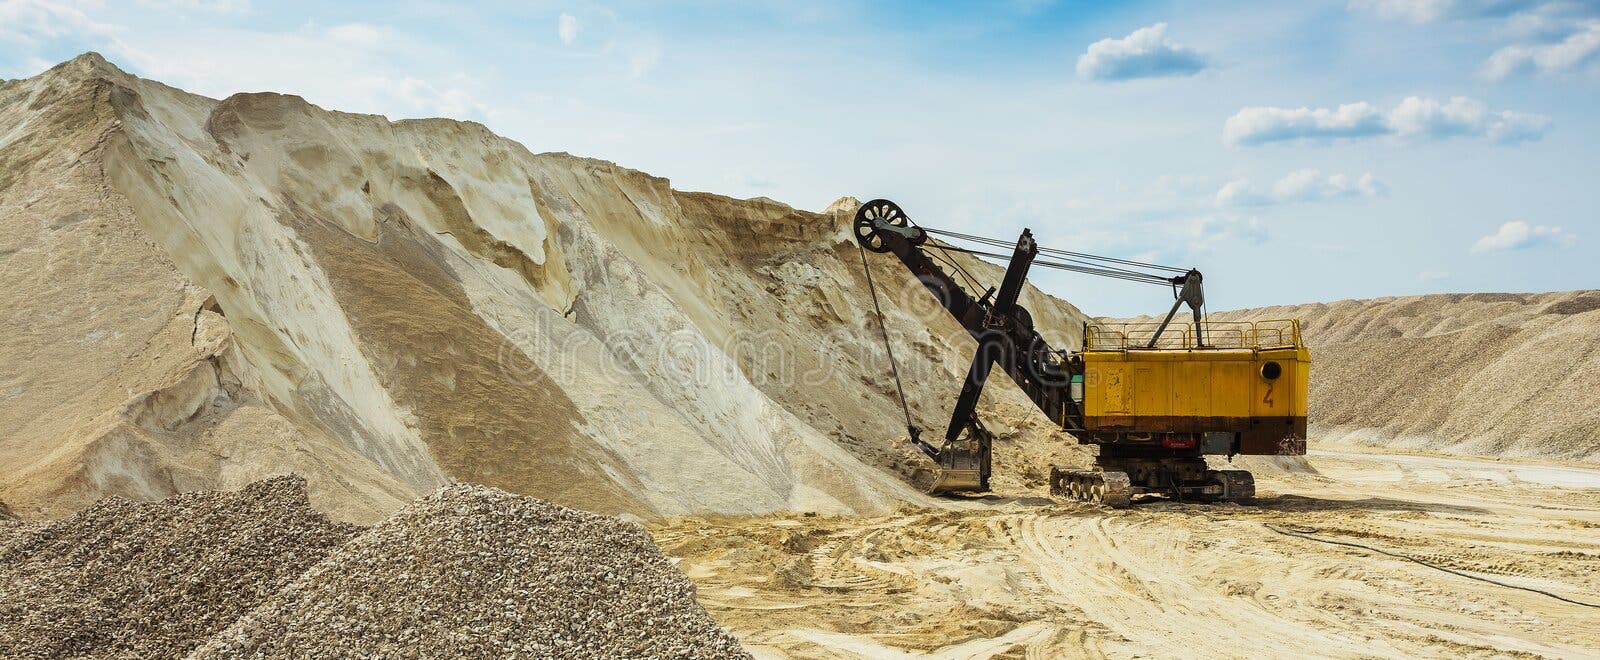 Mobile Stone Crusher Machine By The Construction Site Or Mining Quarry For  Crushing Old Concrete Slabs Into Gravel And Subsequent Cement Production.  Stock Photo, Picture and Royalty Free Image. Image 130474849.